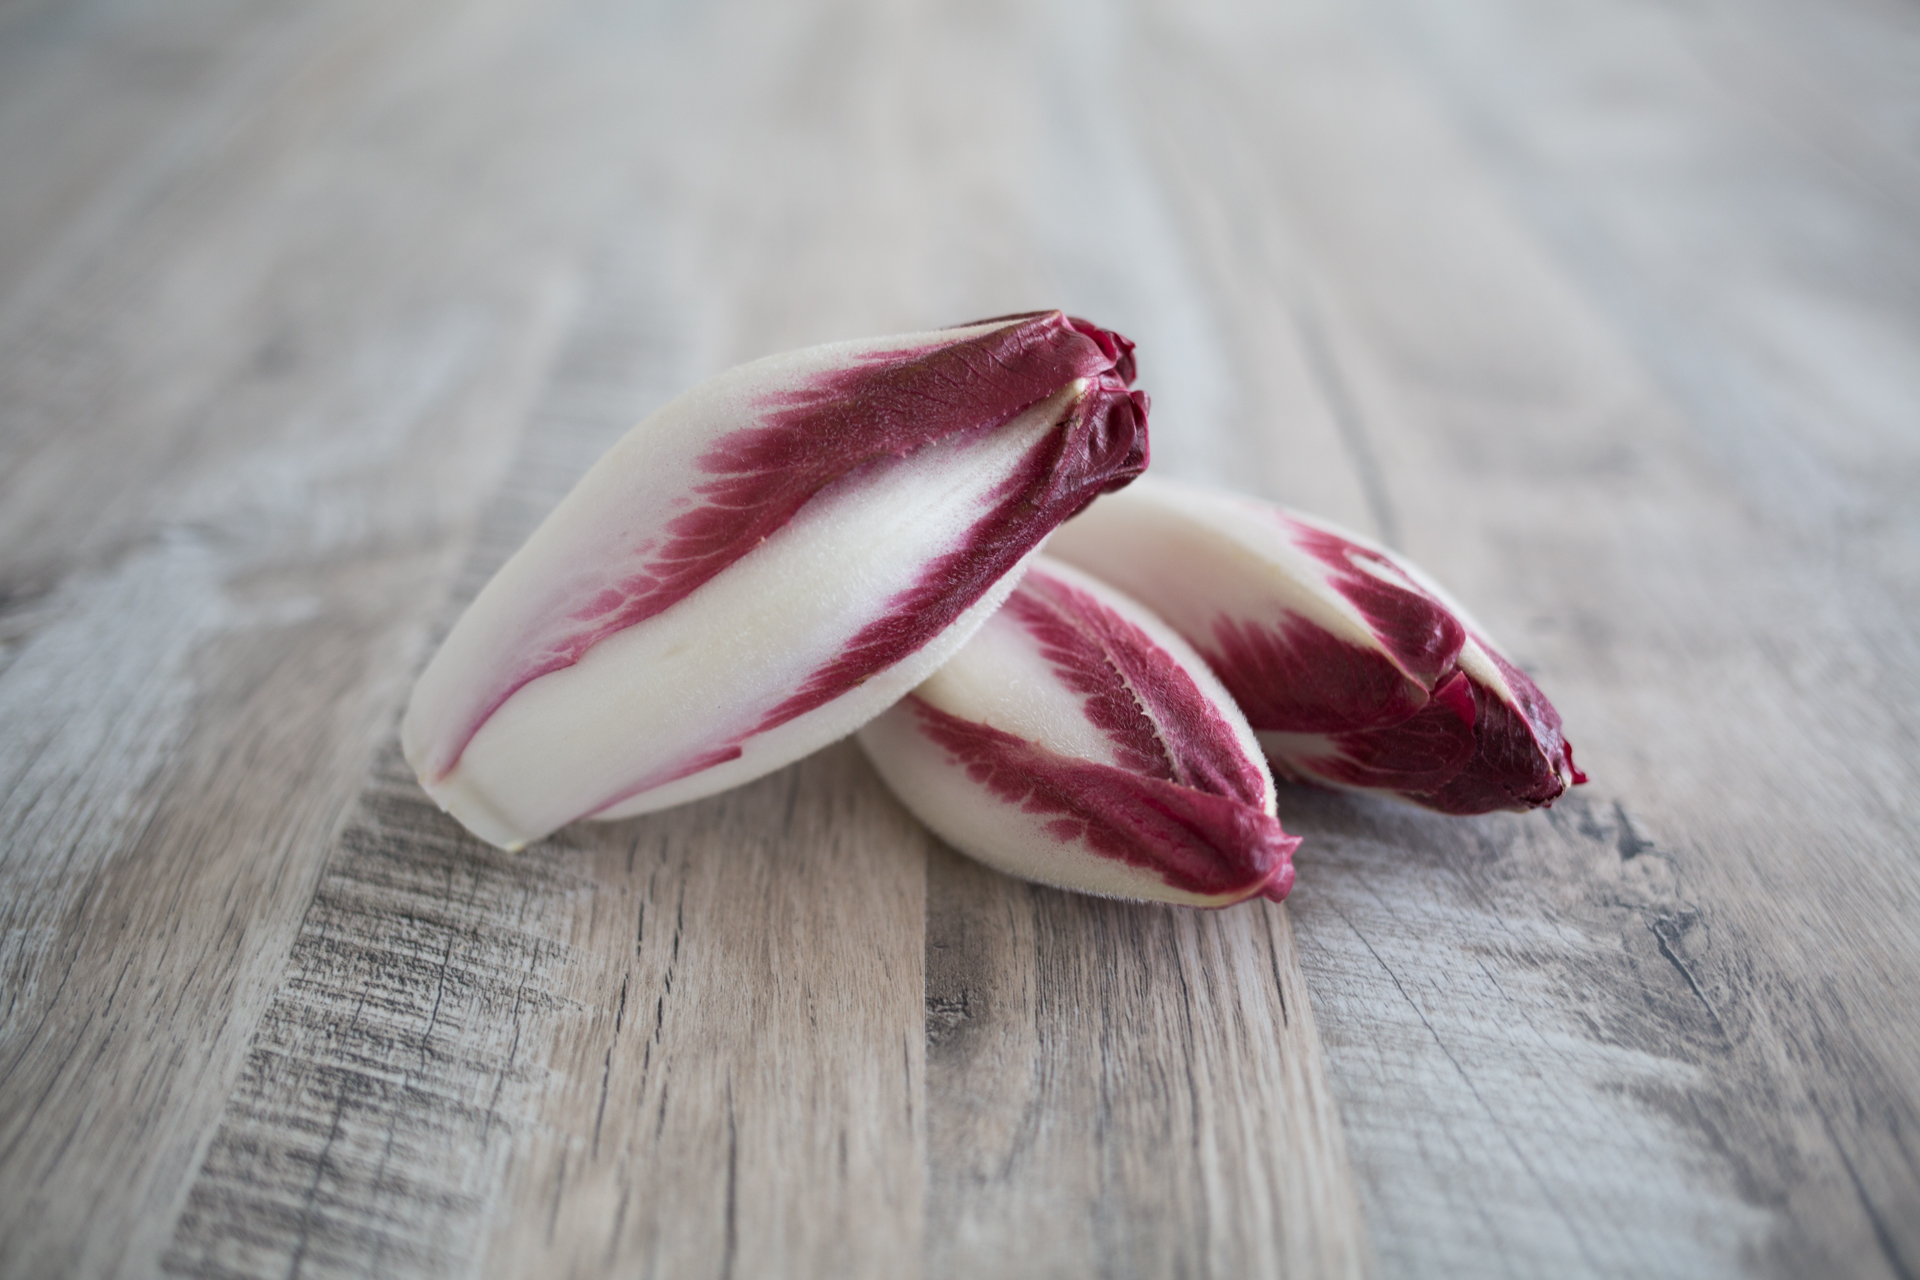 Red endive